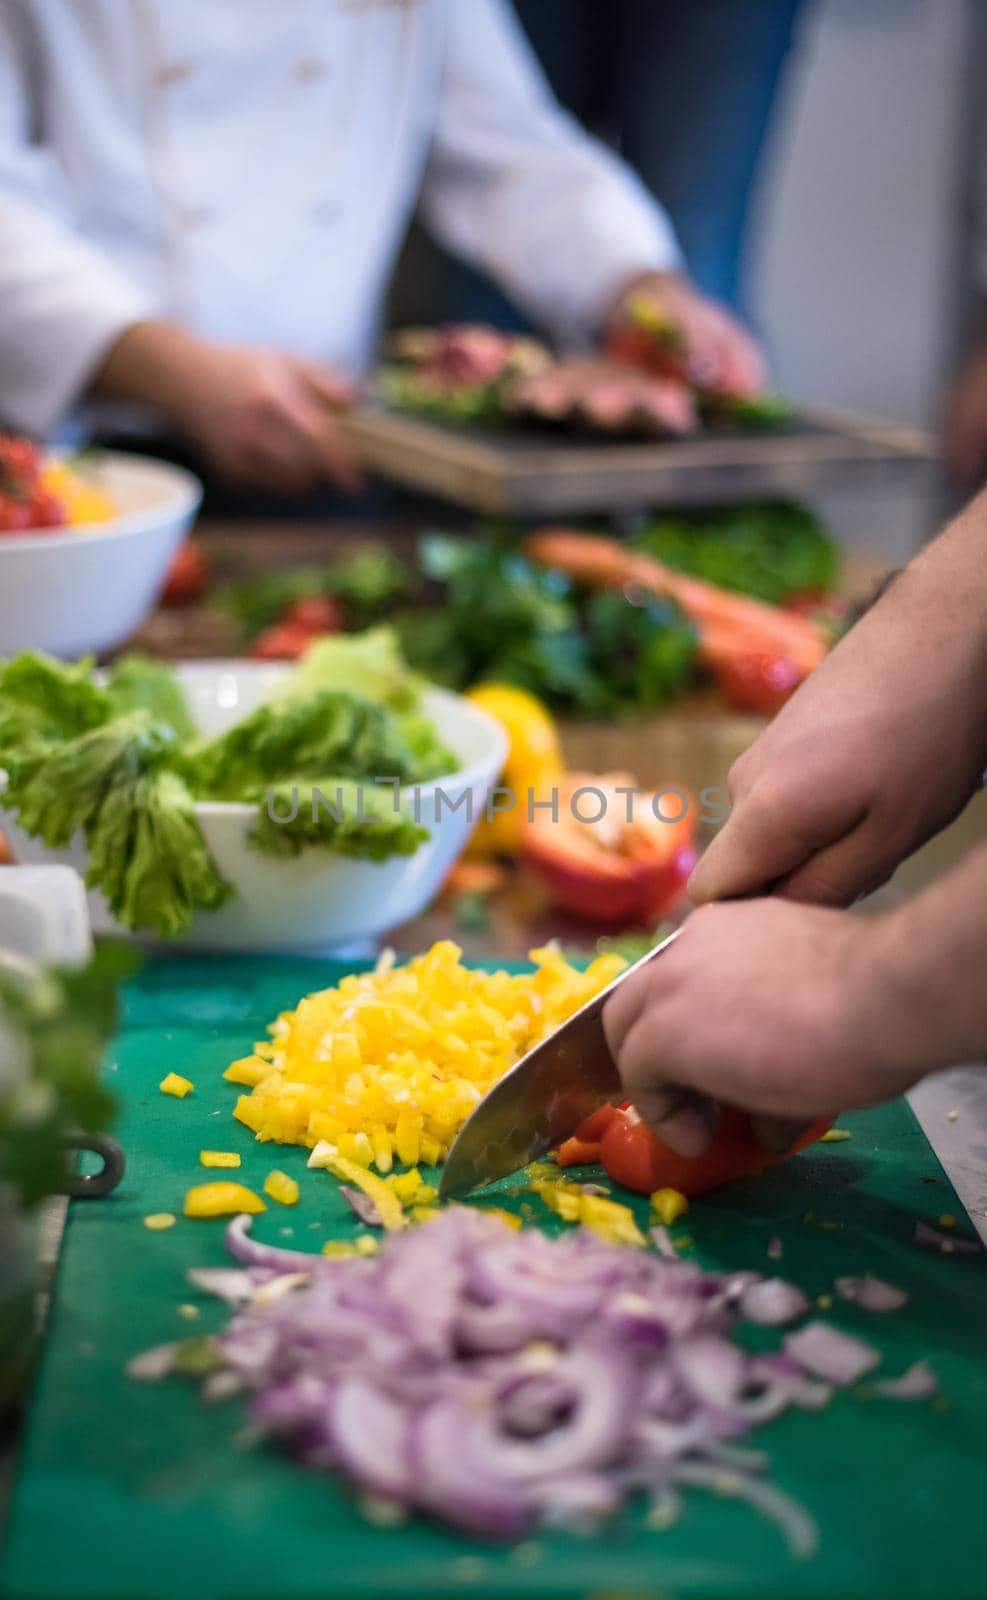 Chef hands cutting fresh and delicious vegetables for cooking or salad